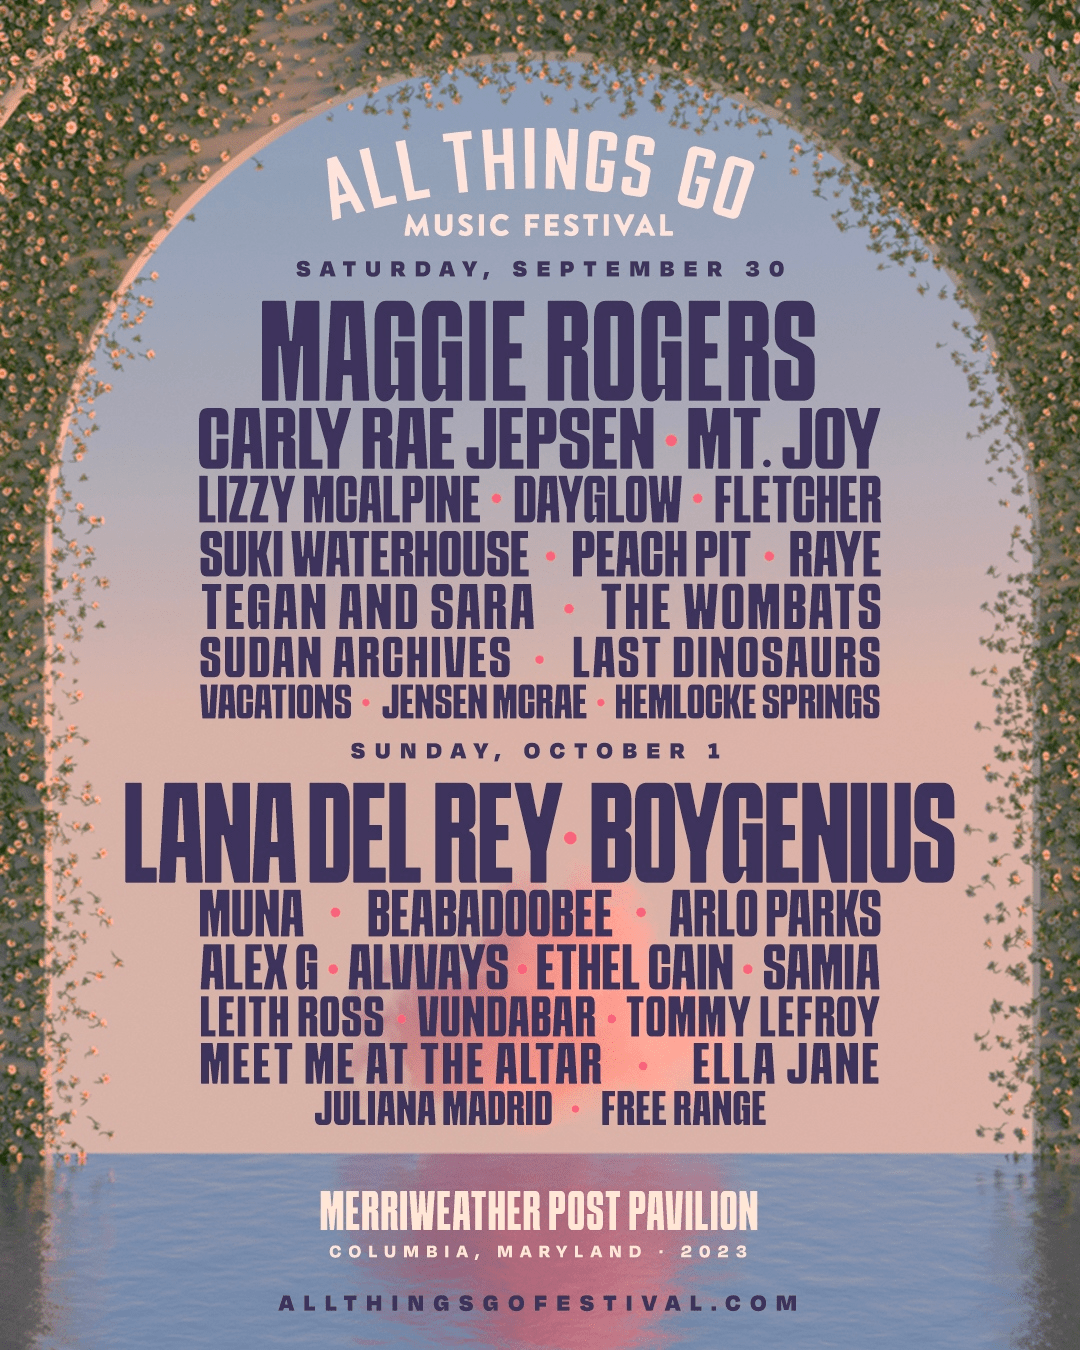 All Things Go Music Festival lineup poster